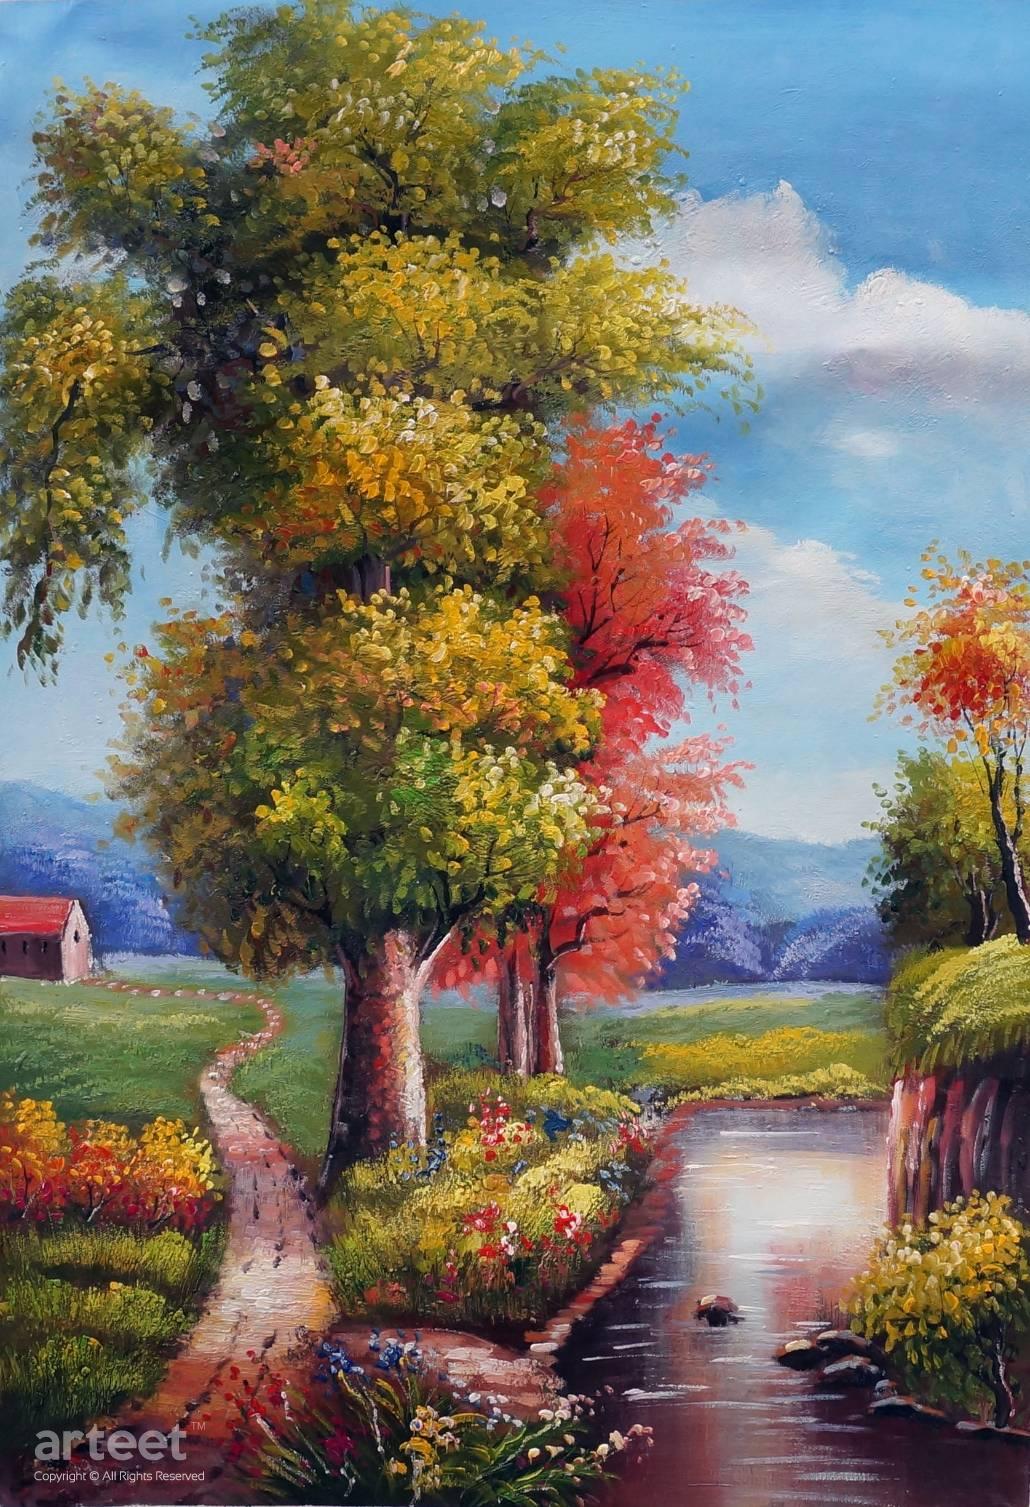 Early September in Tuscany | Art Paintings for Sale, Online Gallery